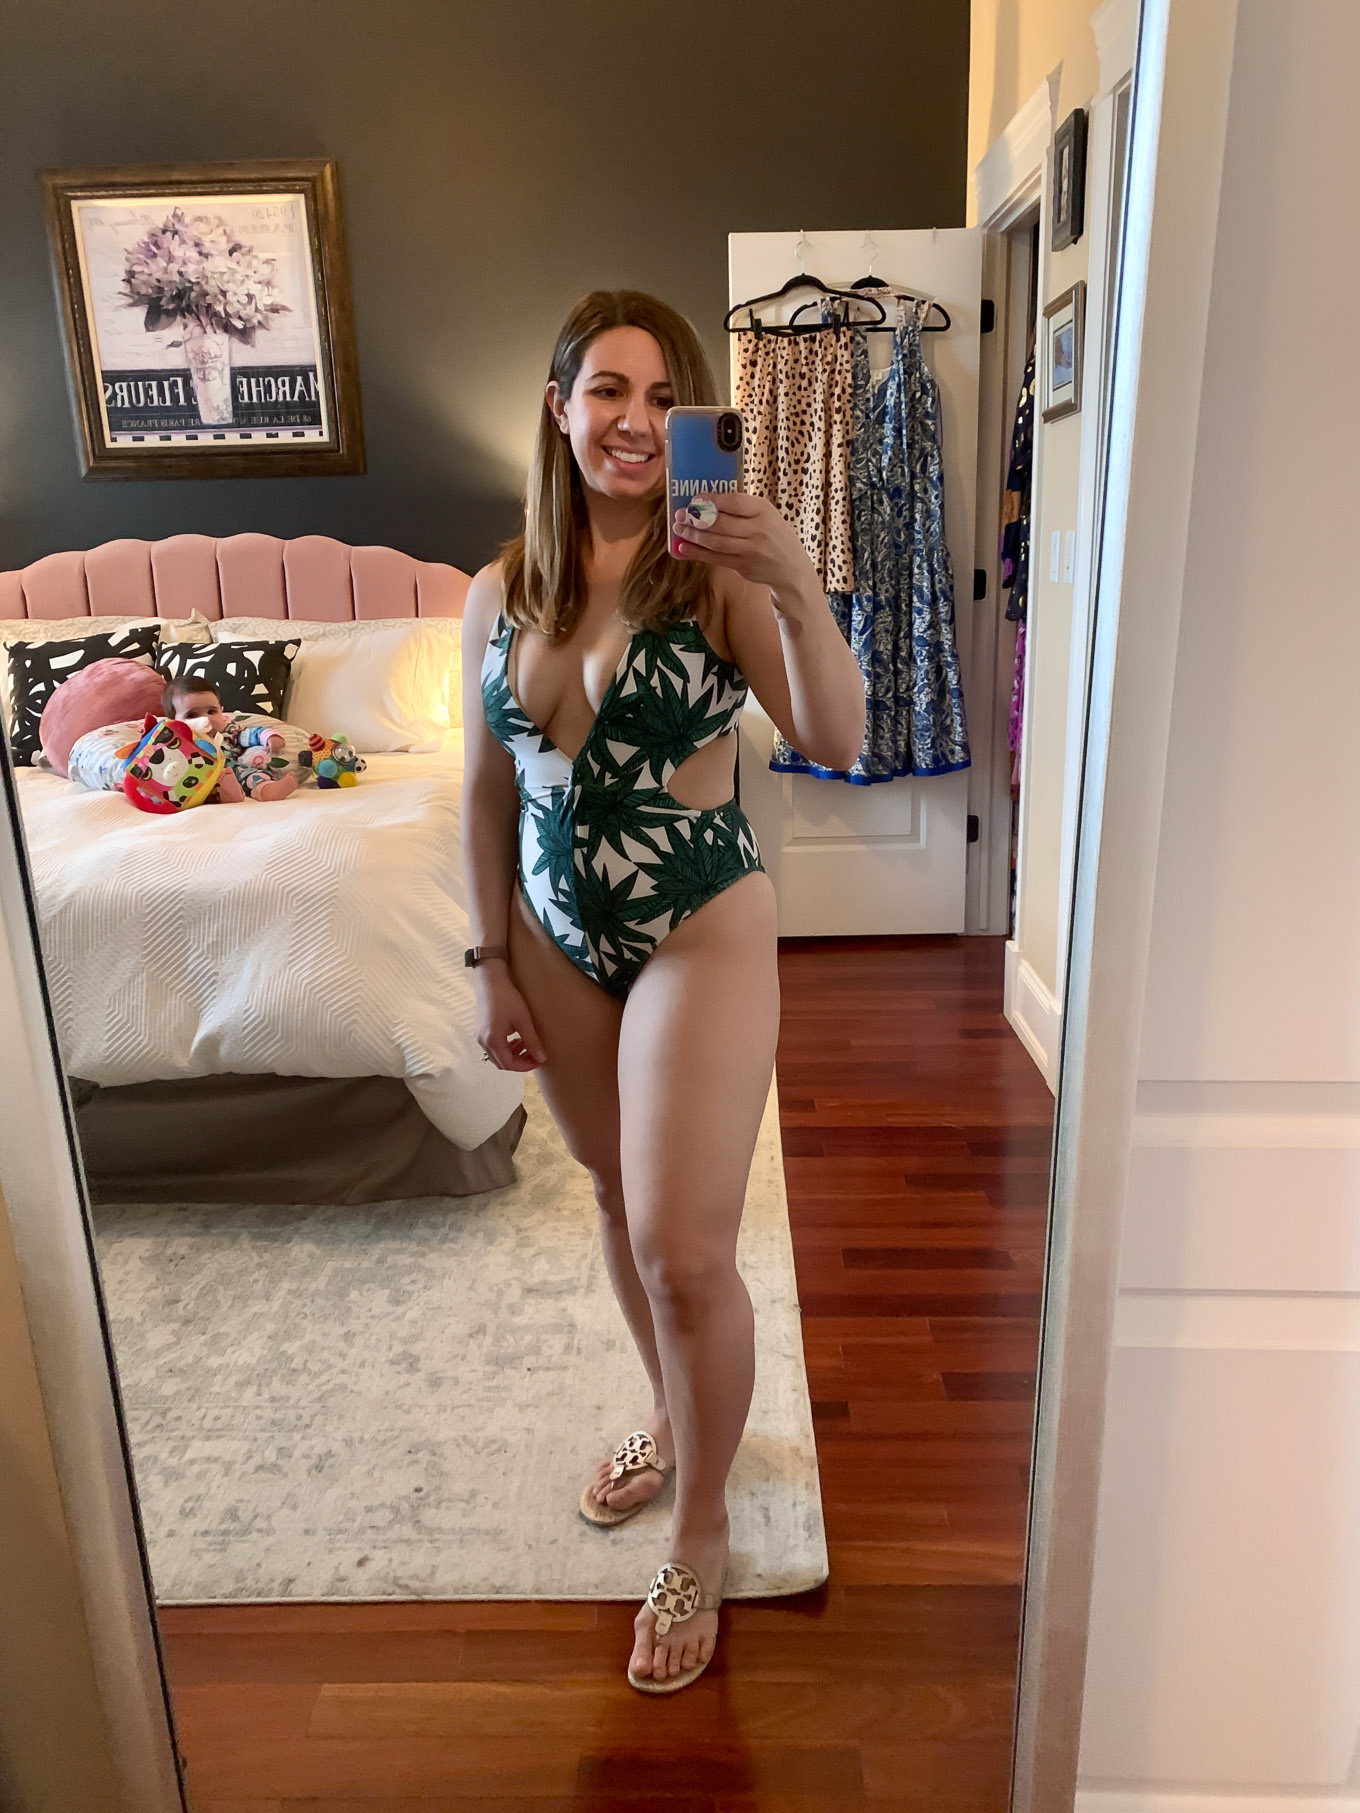 At Home Swimwear Try On by popular Chicago fashion blog, Glass of Glam: image of a woman standing in her master bedroom and wearing a Amazon L'amore Women's Deep Plunge High Waisted One Piece Swimsuit.